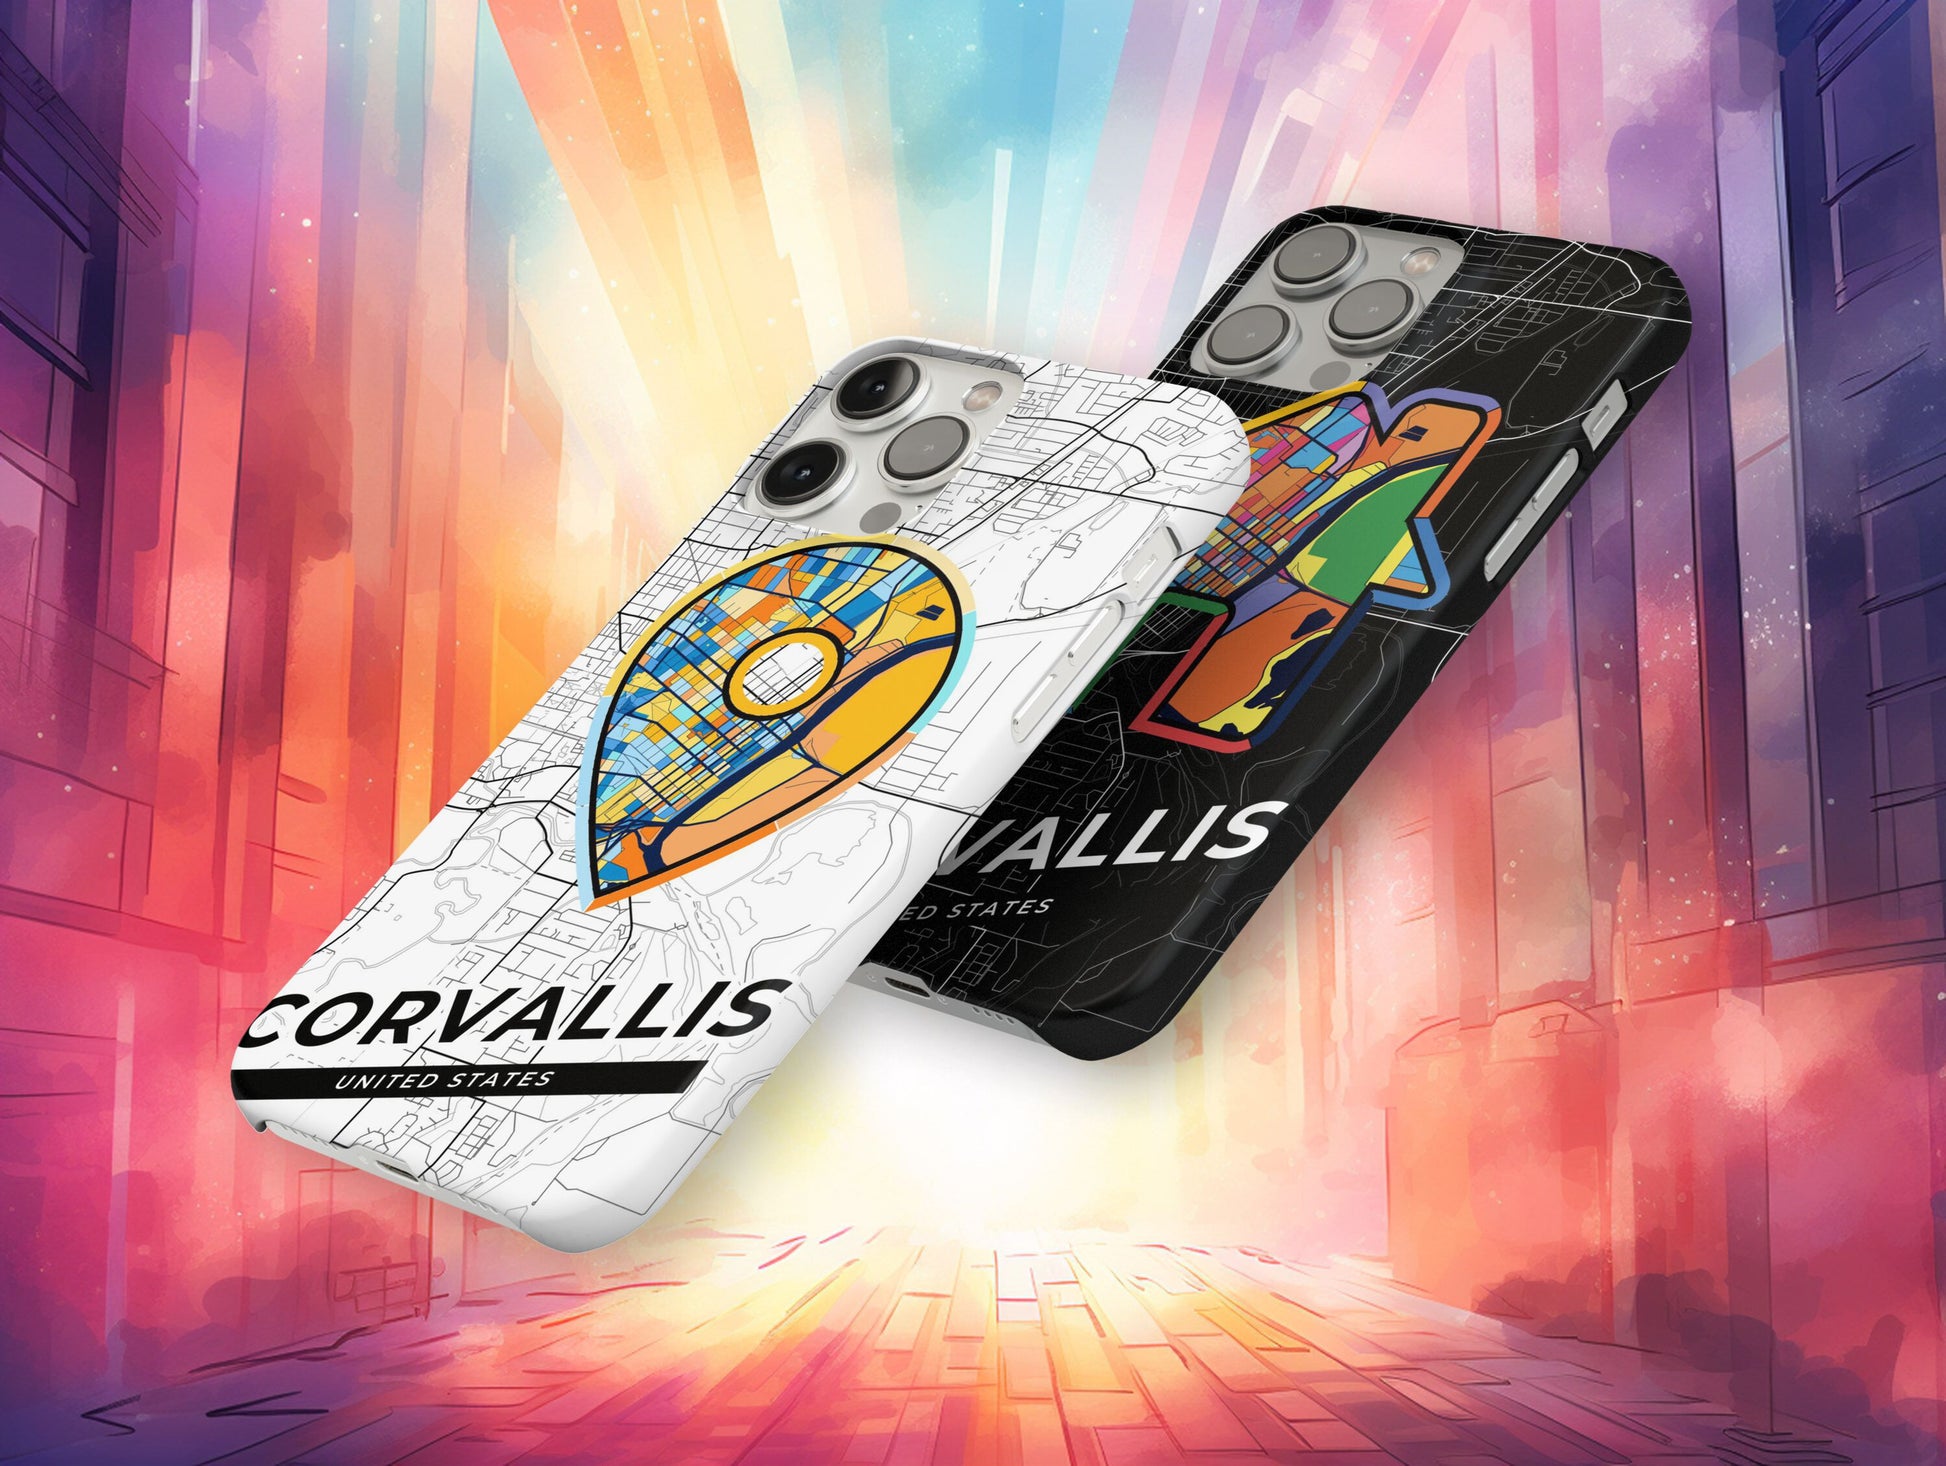 Corvallis Oregon slim phone case with colorful icon. Birthday, wedding or housewarming gift. Couple match cases.